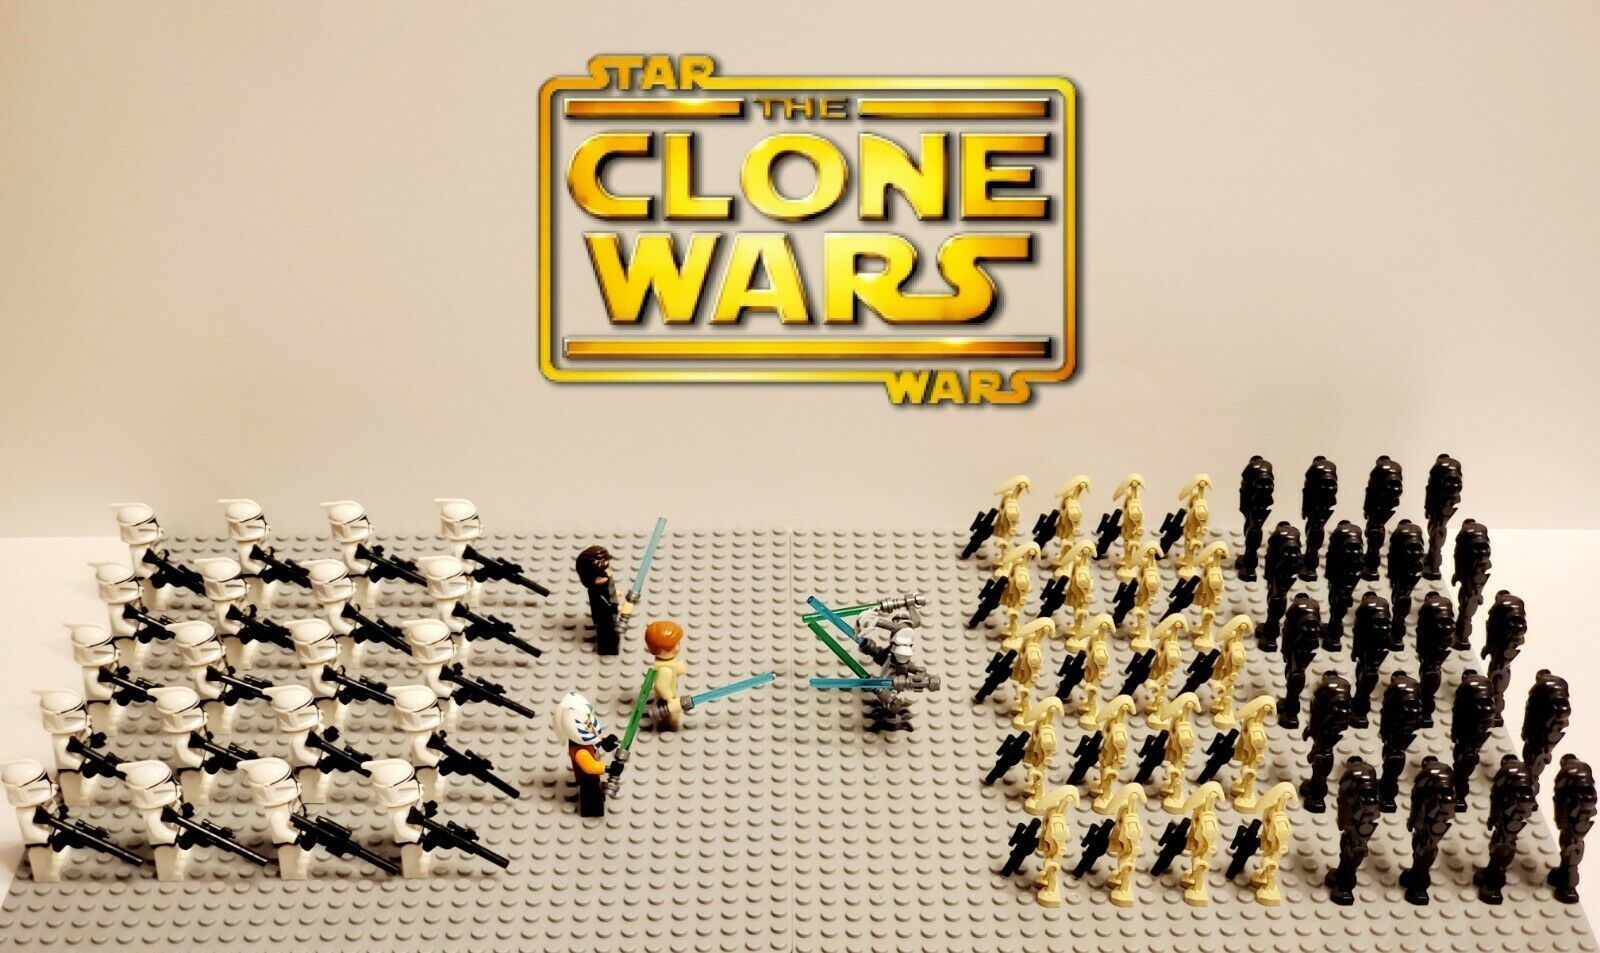 Gahub - 64pcs star wars the clone wars battle of geonosis minifigures collection toys